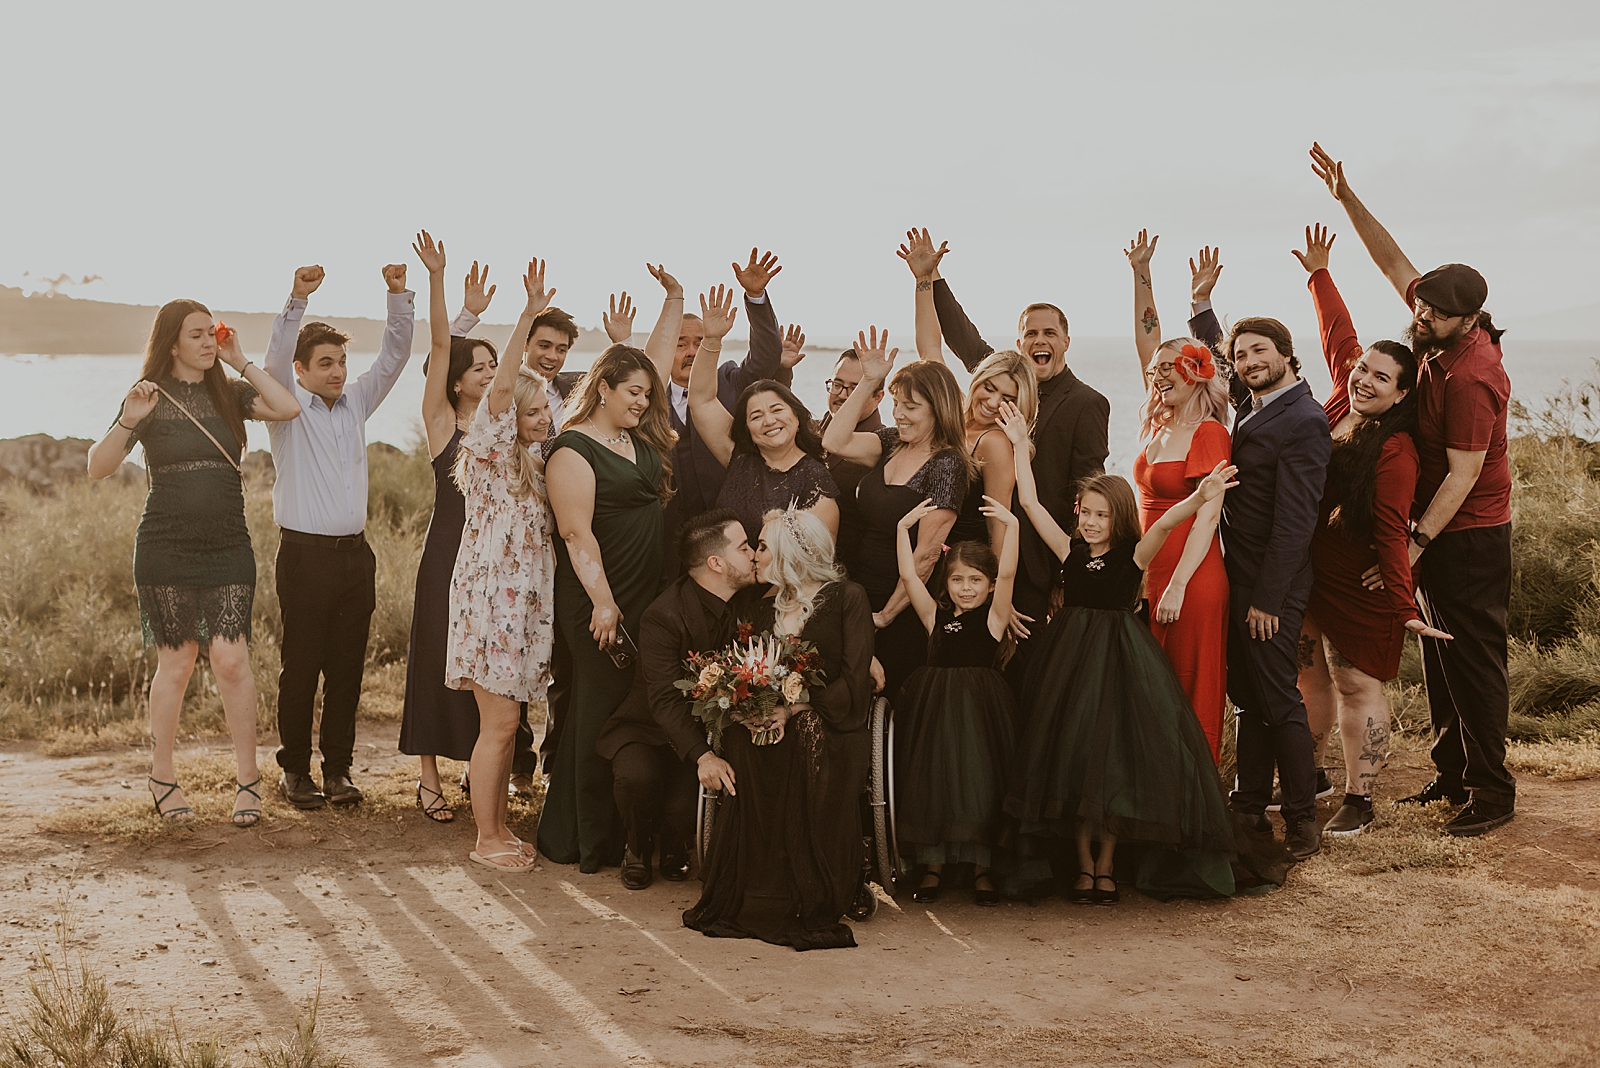 Family portrait of inter-able Bride and Groom kissing and family raising hands celebrating by the cliff side